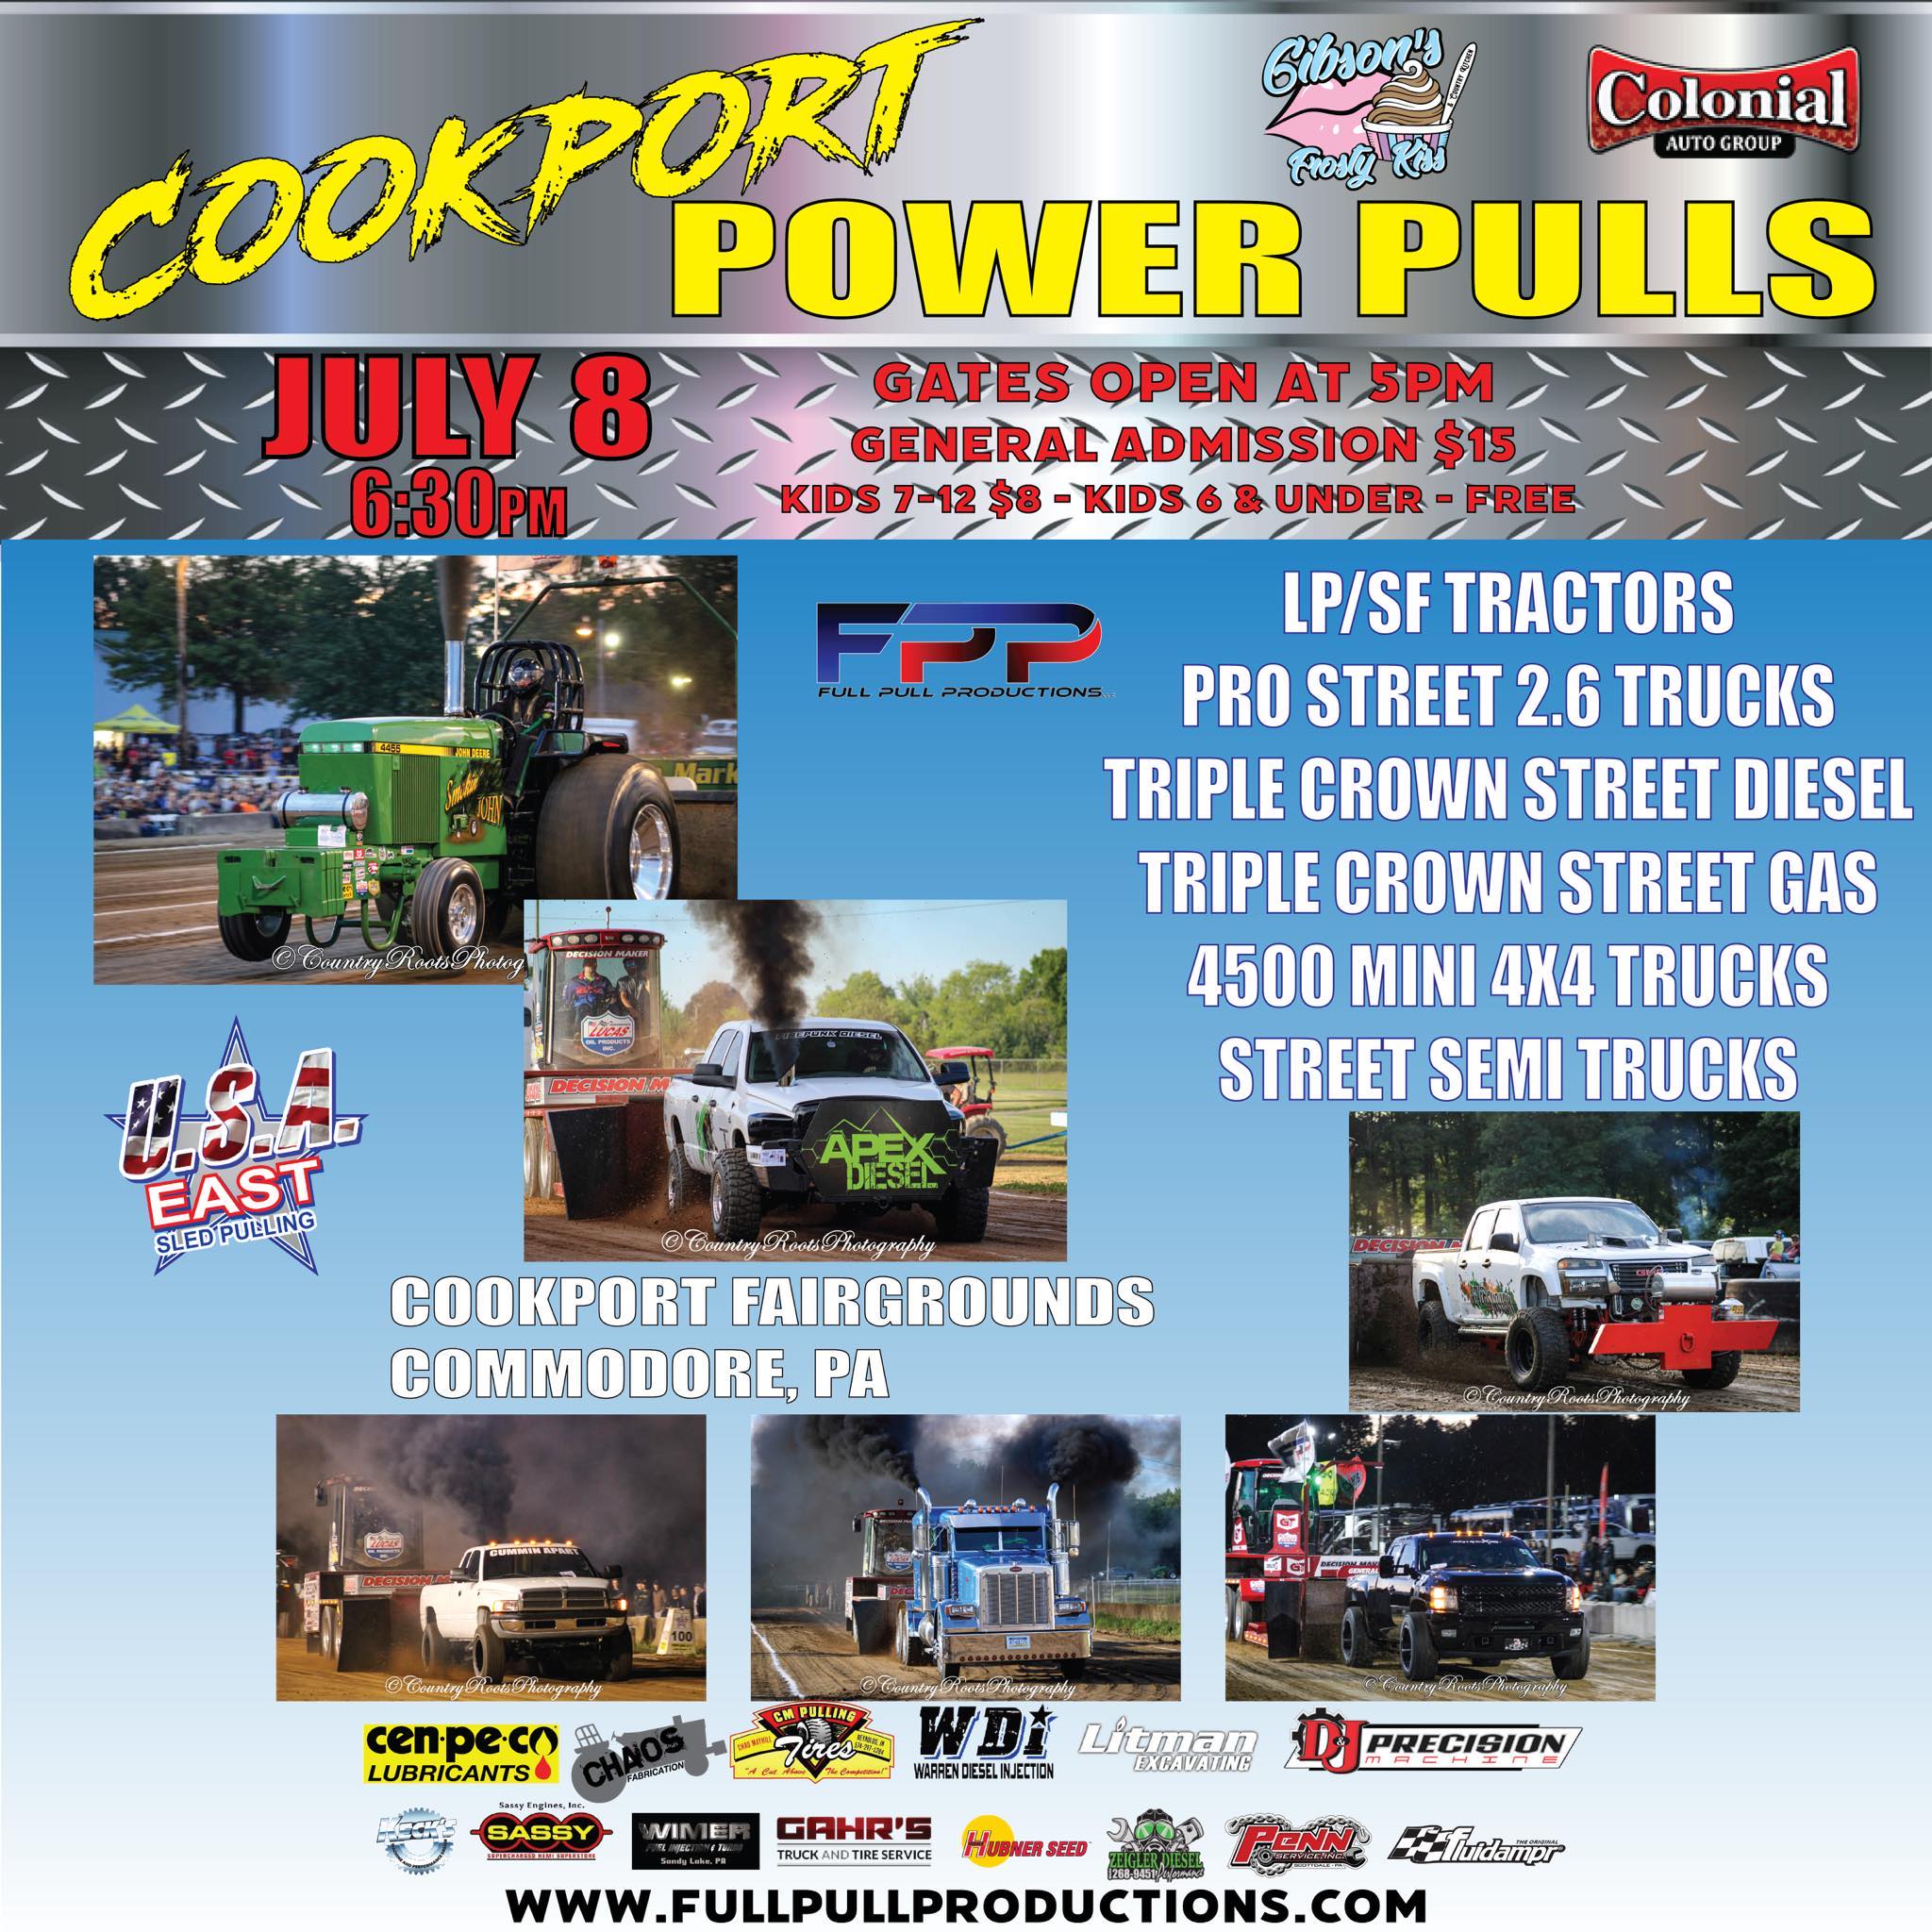 Cookport Power Pulls Visit Indiana County Pennsylvania